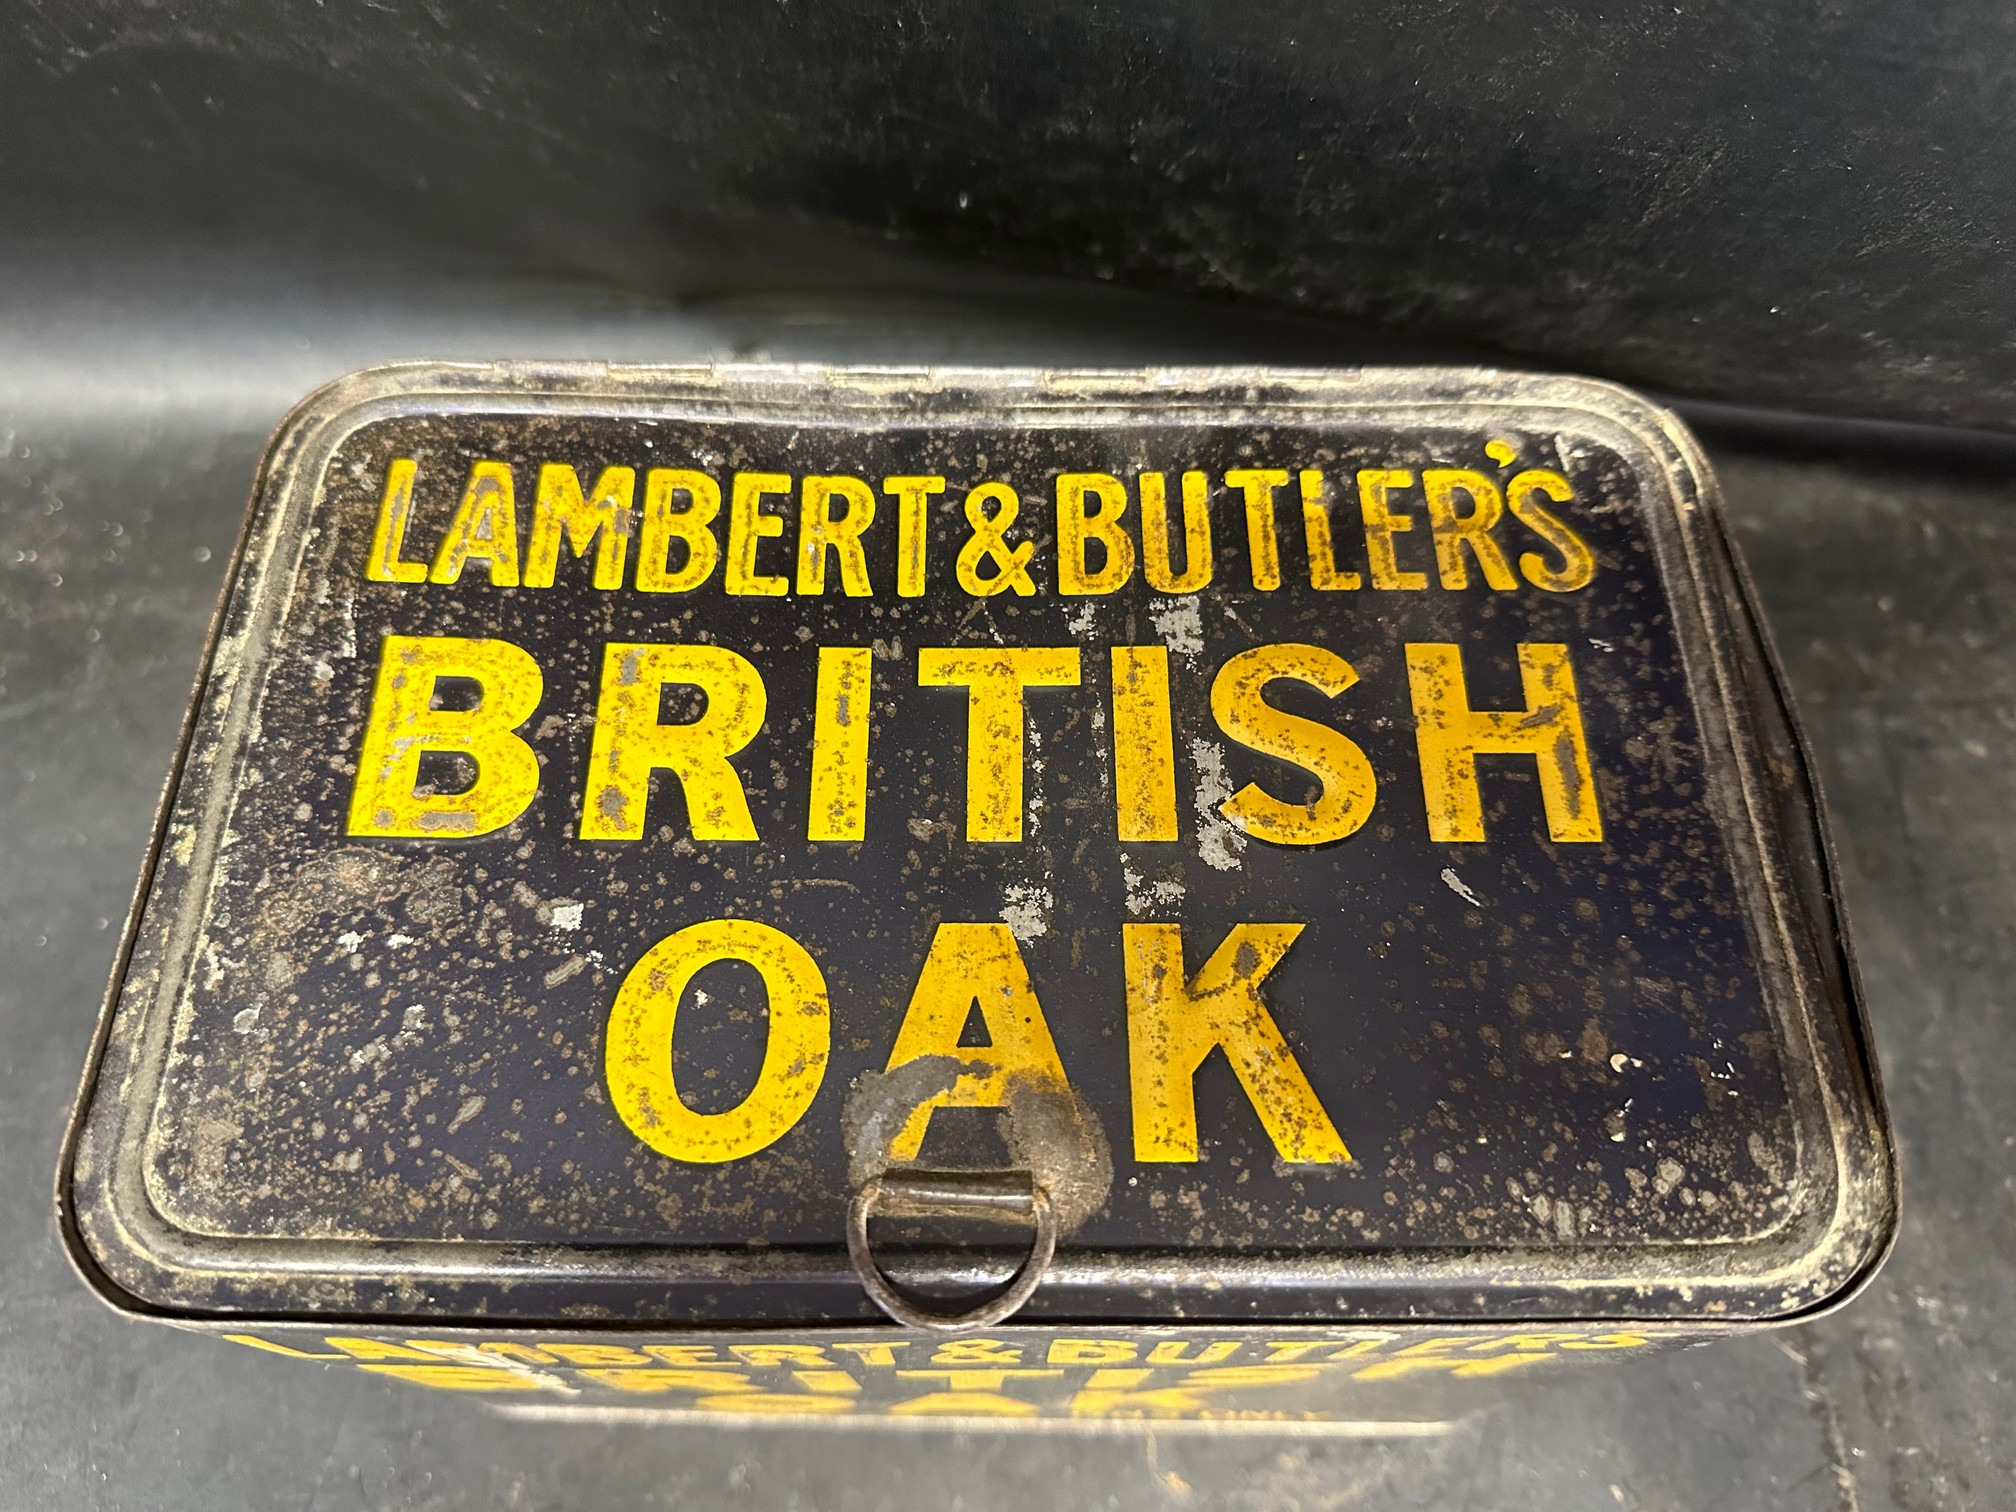 A Lambert & Butler's British Oak in packets and tins only counter box for "British Oak Shag", issued - Image 2 of 8